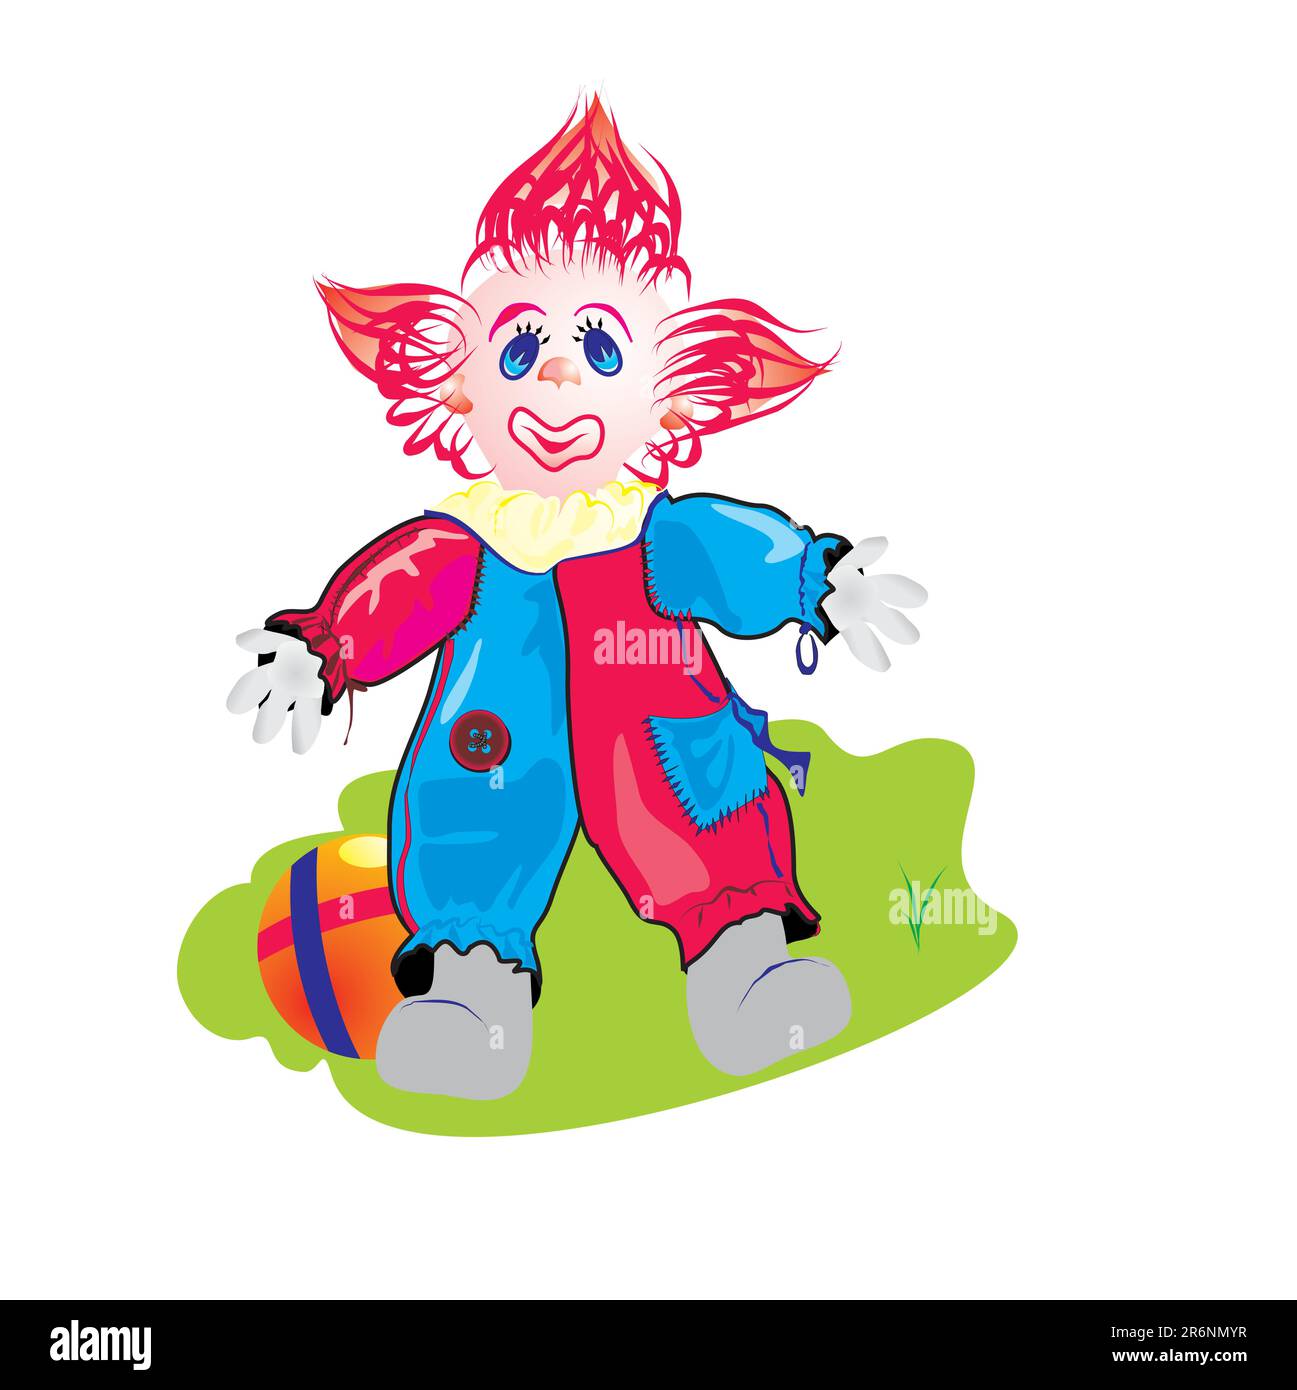 smiled clown with red hair and elastic kids ball Stock Vector